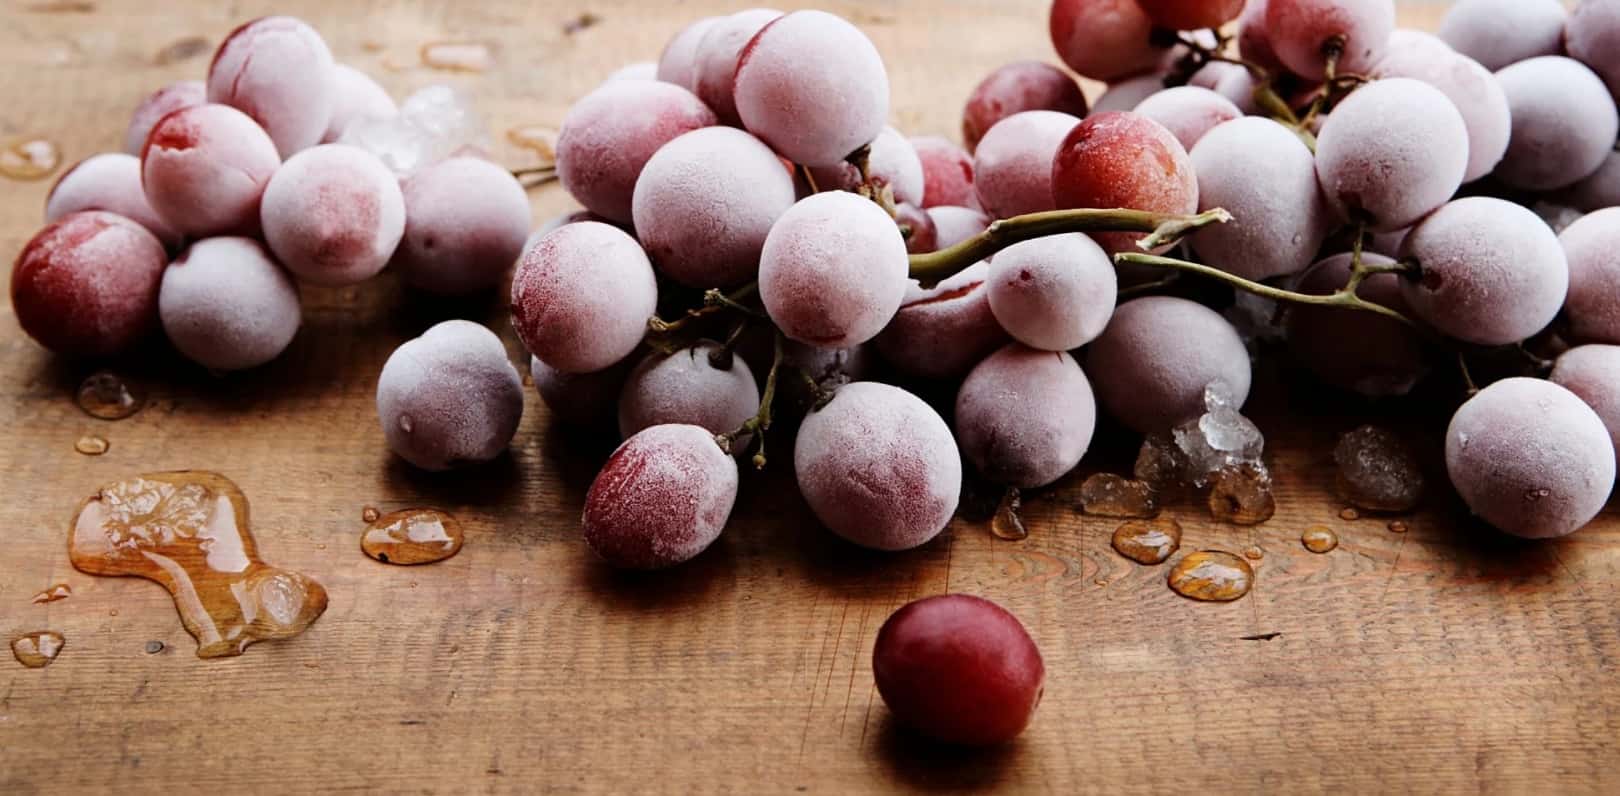 How To Defrost Grapes